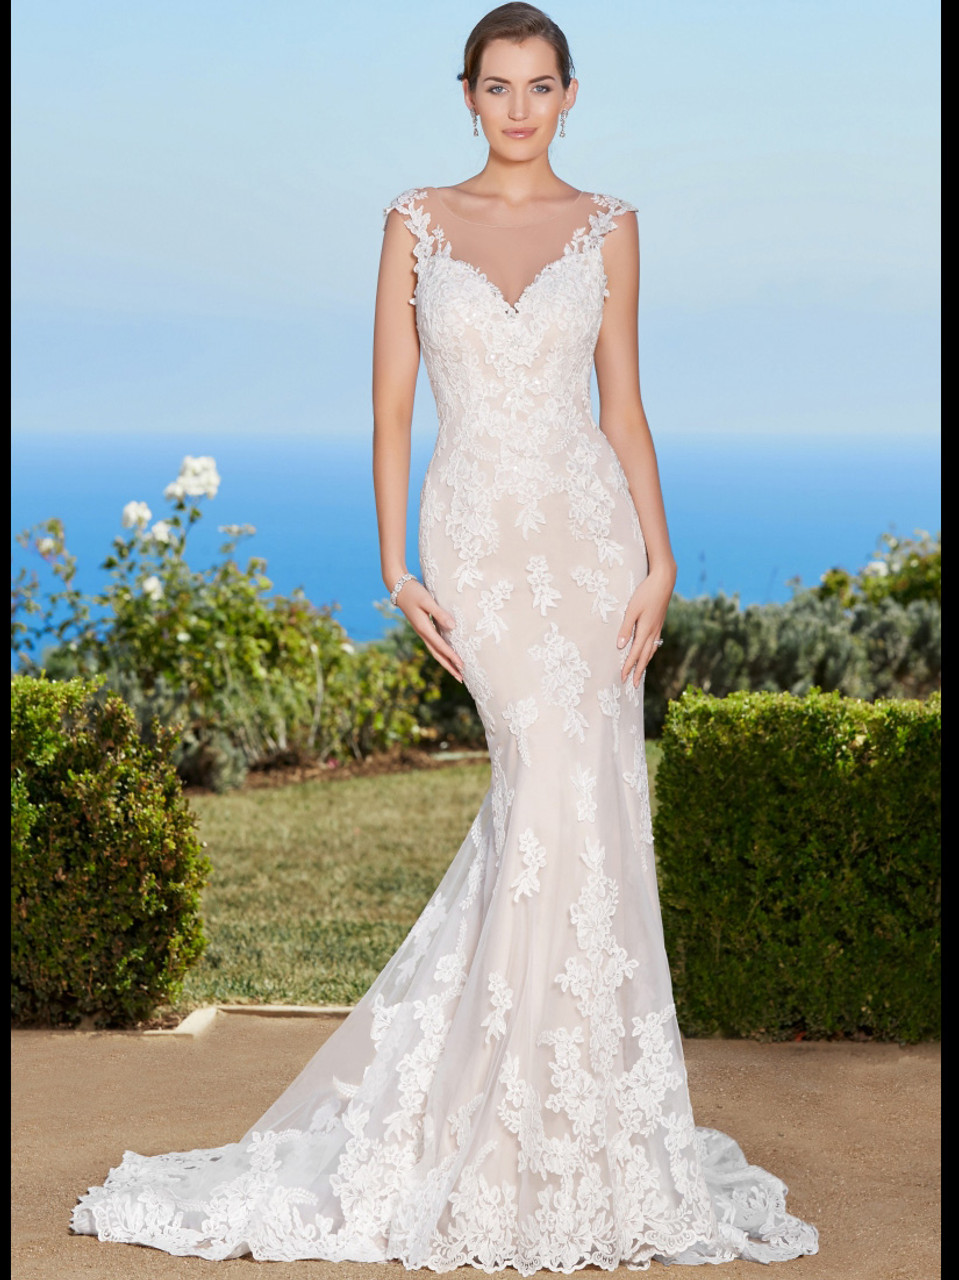 Low back wedding dress «Mallory» with detachable skirt